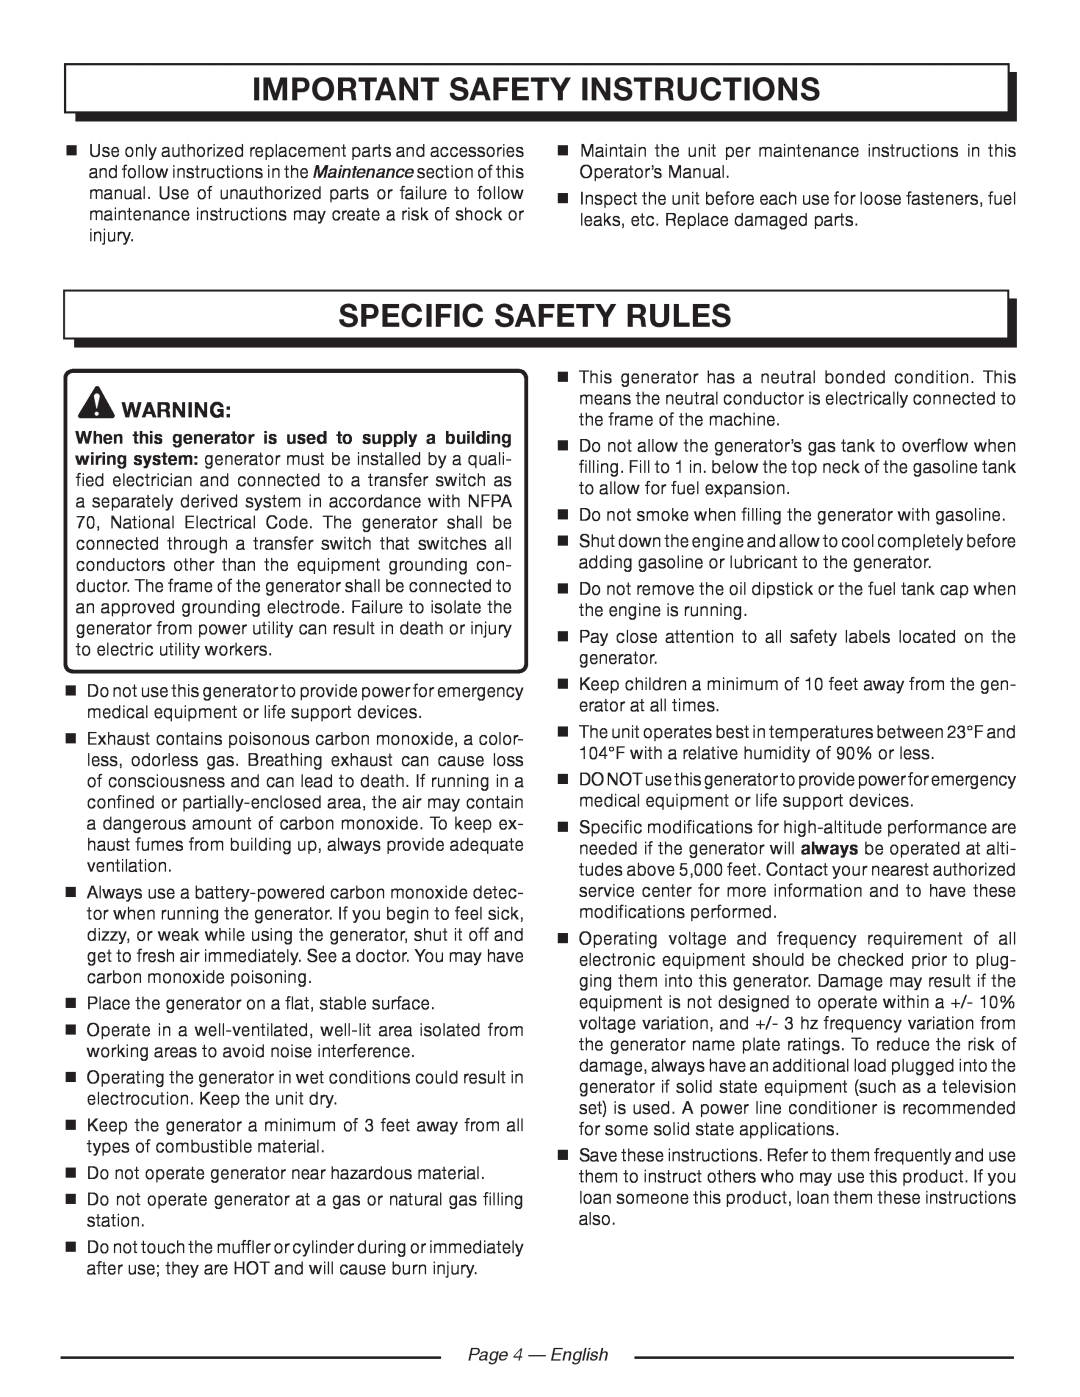 Homelite HGCA5000 manuel dutilisation Specific Safety Rules, Page 4 - English, Important Safety Instructions 